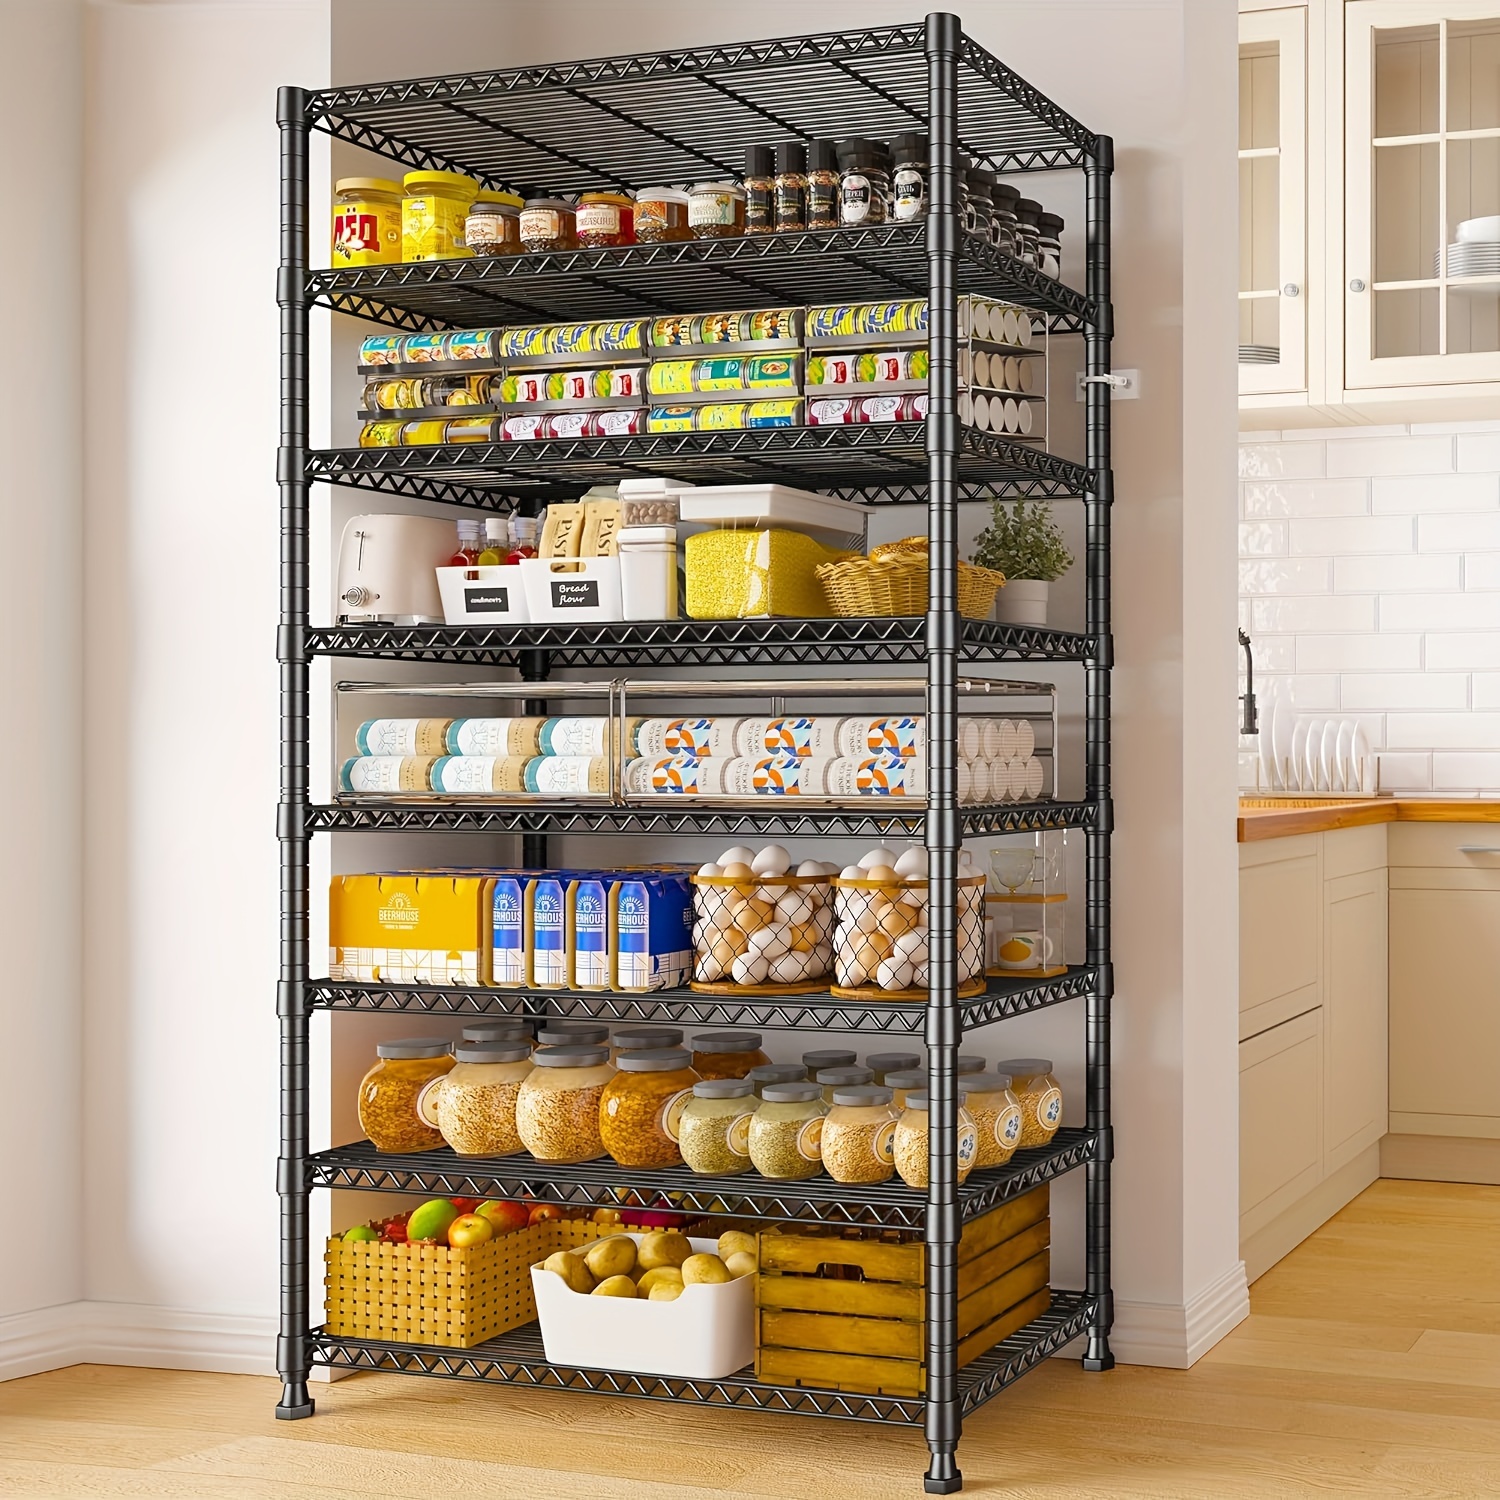 

8-tier Metal Shelves 75" Tall Wire Shelving Detachable Shelving Unit Adjustable Storage Shelves For Laundry Pantry Kitchen Living Room Heavy Duty Storage Rack 74.4" H X35 W X13.6 D